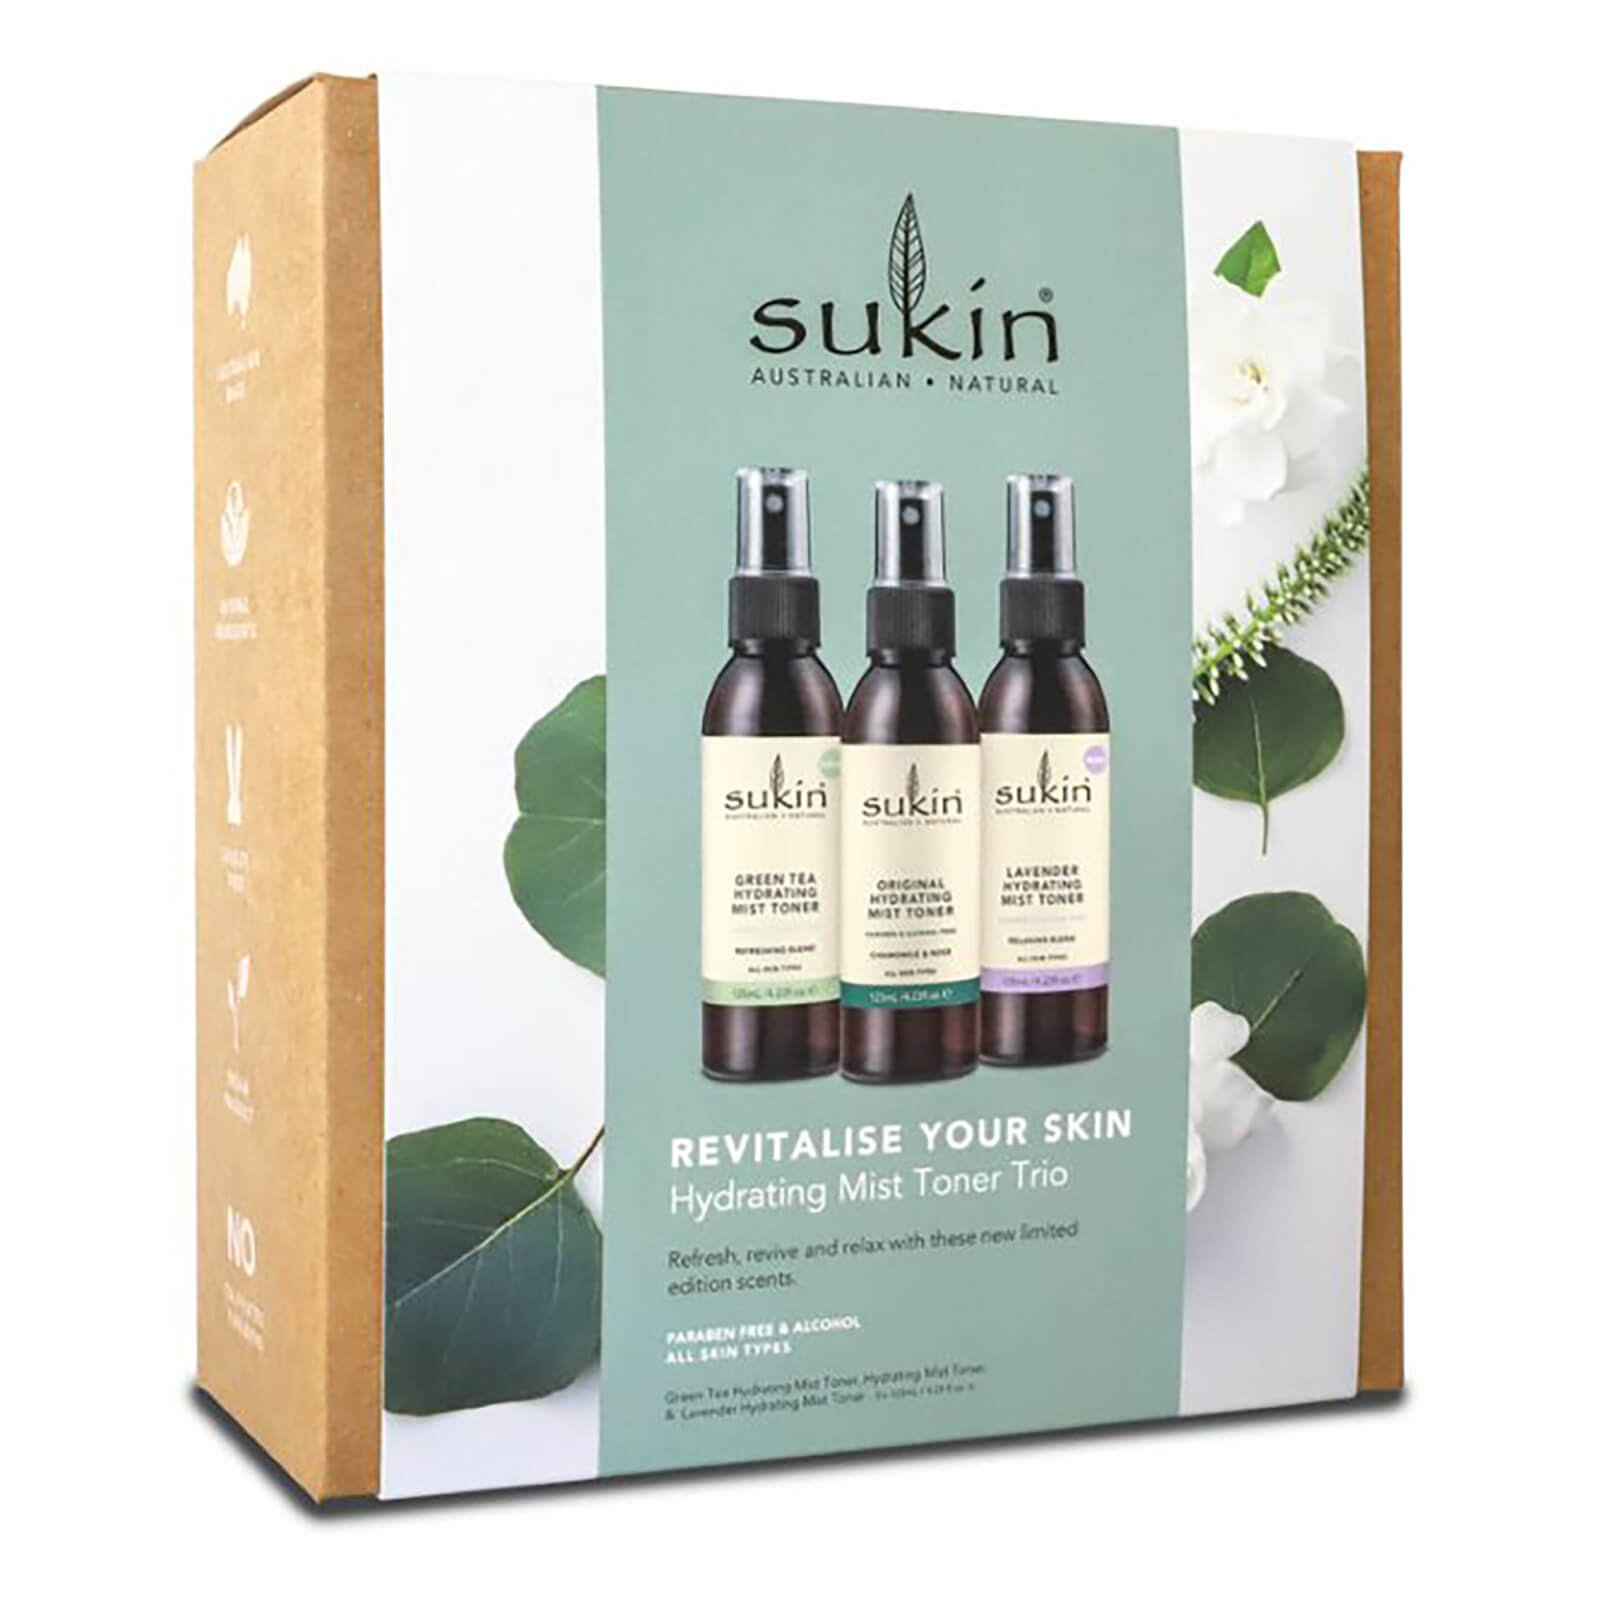 Image of Sukin Revitalize Your Skin Hydrating Mist Toner Trio Pack